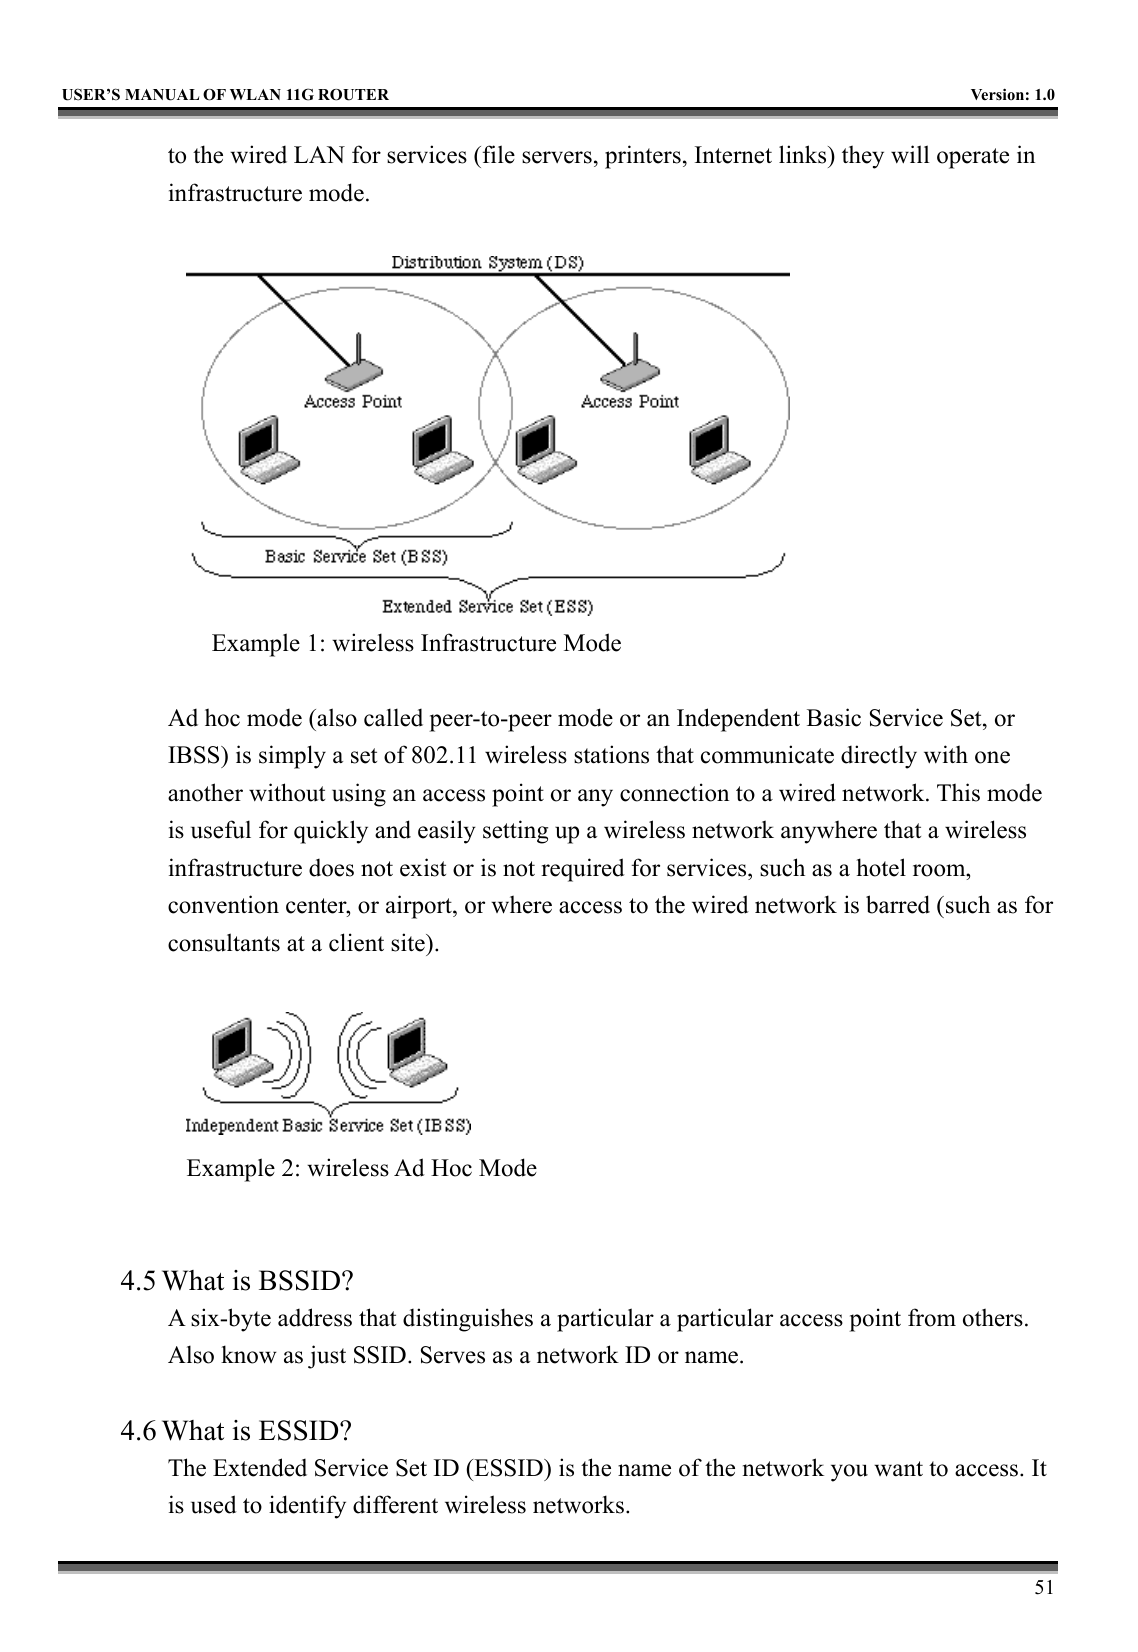   USER’S MANUAL OF WLAN 11G ROUTER    Version: 1.0     51 to the wired LAN for services (file servers, printers, Internet links) they will operate in infrastructure mode.     Example 1: wireless Infrastructure Mode  Ad hoc mode (also called peer-to-peer mode or an Independent Basic Service Set, or IBSS) is simply a set of 802.11 wireless stations that communicate directly with one another without using an access point or any connection to a wired network. This mode is useful for quickly and easily setting up a wireless network anywhere that a wireless infrastructure does not exist or is not required for services, such as a hotel room, convention center, or airport, or where access to the wired network is barred (such as for consultants at a client site).     Example 2: wireless Ad Hoc Mode   4.5 What is BSSID?   A six-byte address that distinguishes a particular a particular access point from others. Also know as just SSID. Serves as a network ID or name.    4.6 What is ESSID?   The Extended Service Set ID (ESSID) is the name of the network you want to access. It is used to identify different wireless networks.   